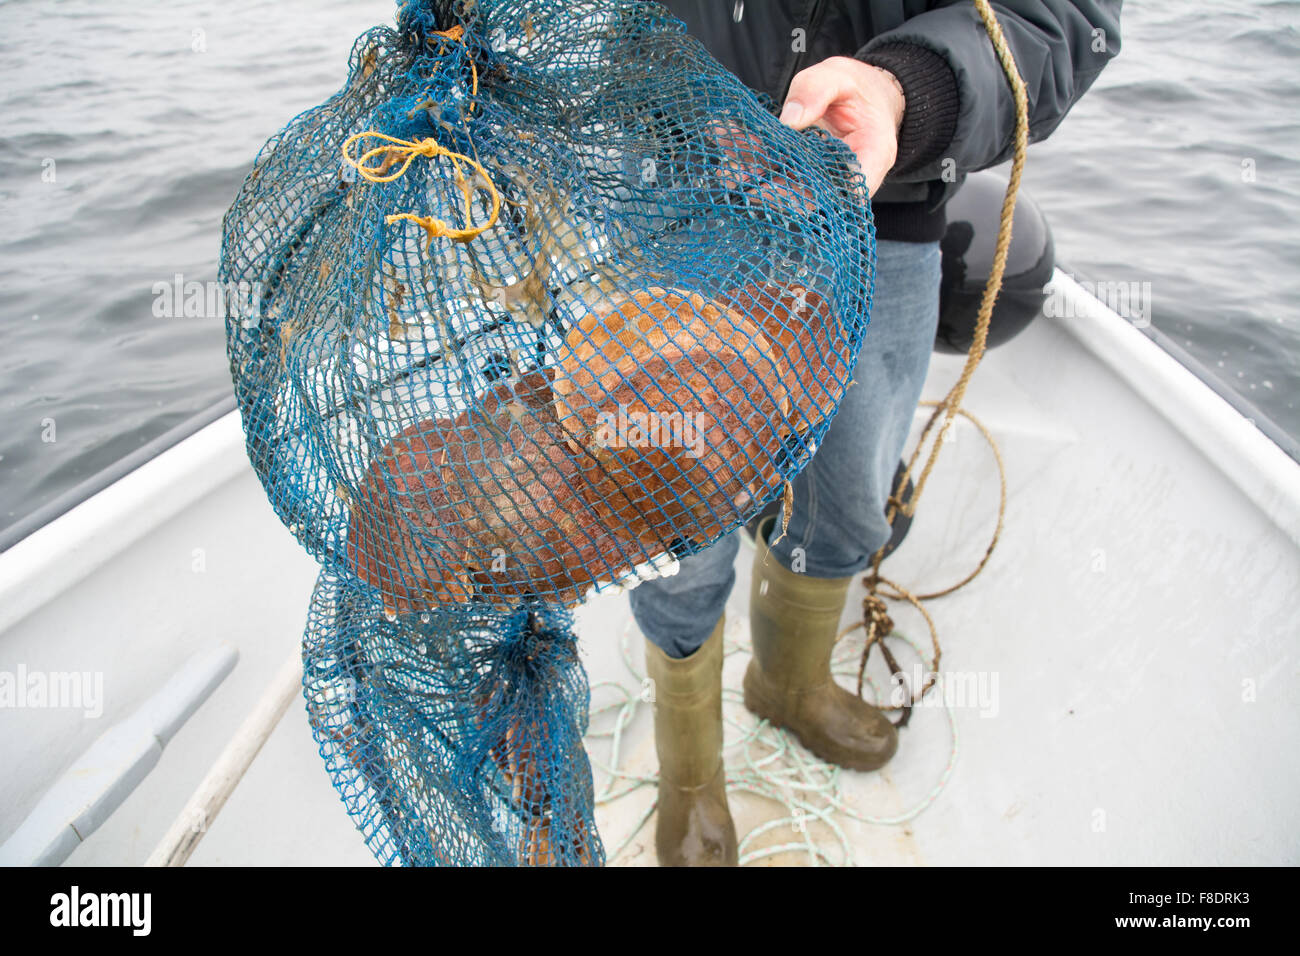 Farmed aquaculture scallops in their shells, grown in a net in the Atlantic waters of Blanc Sablon, Quebec, Canada. Stock Photo